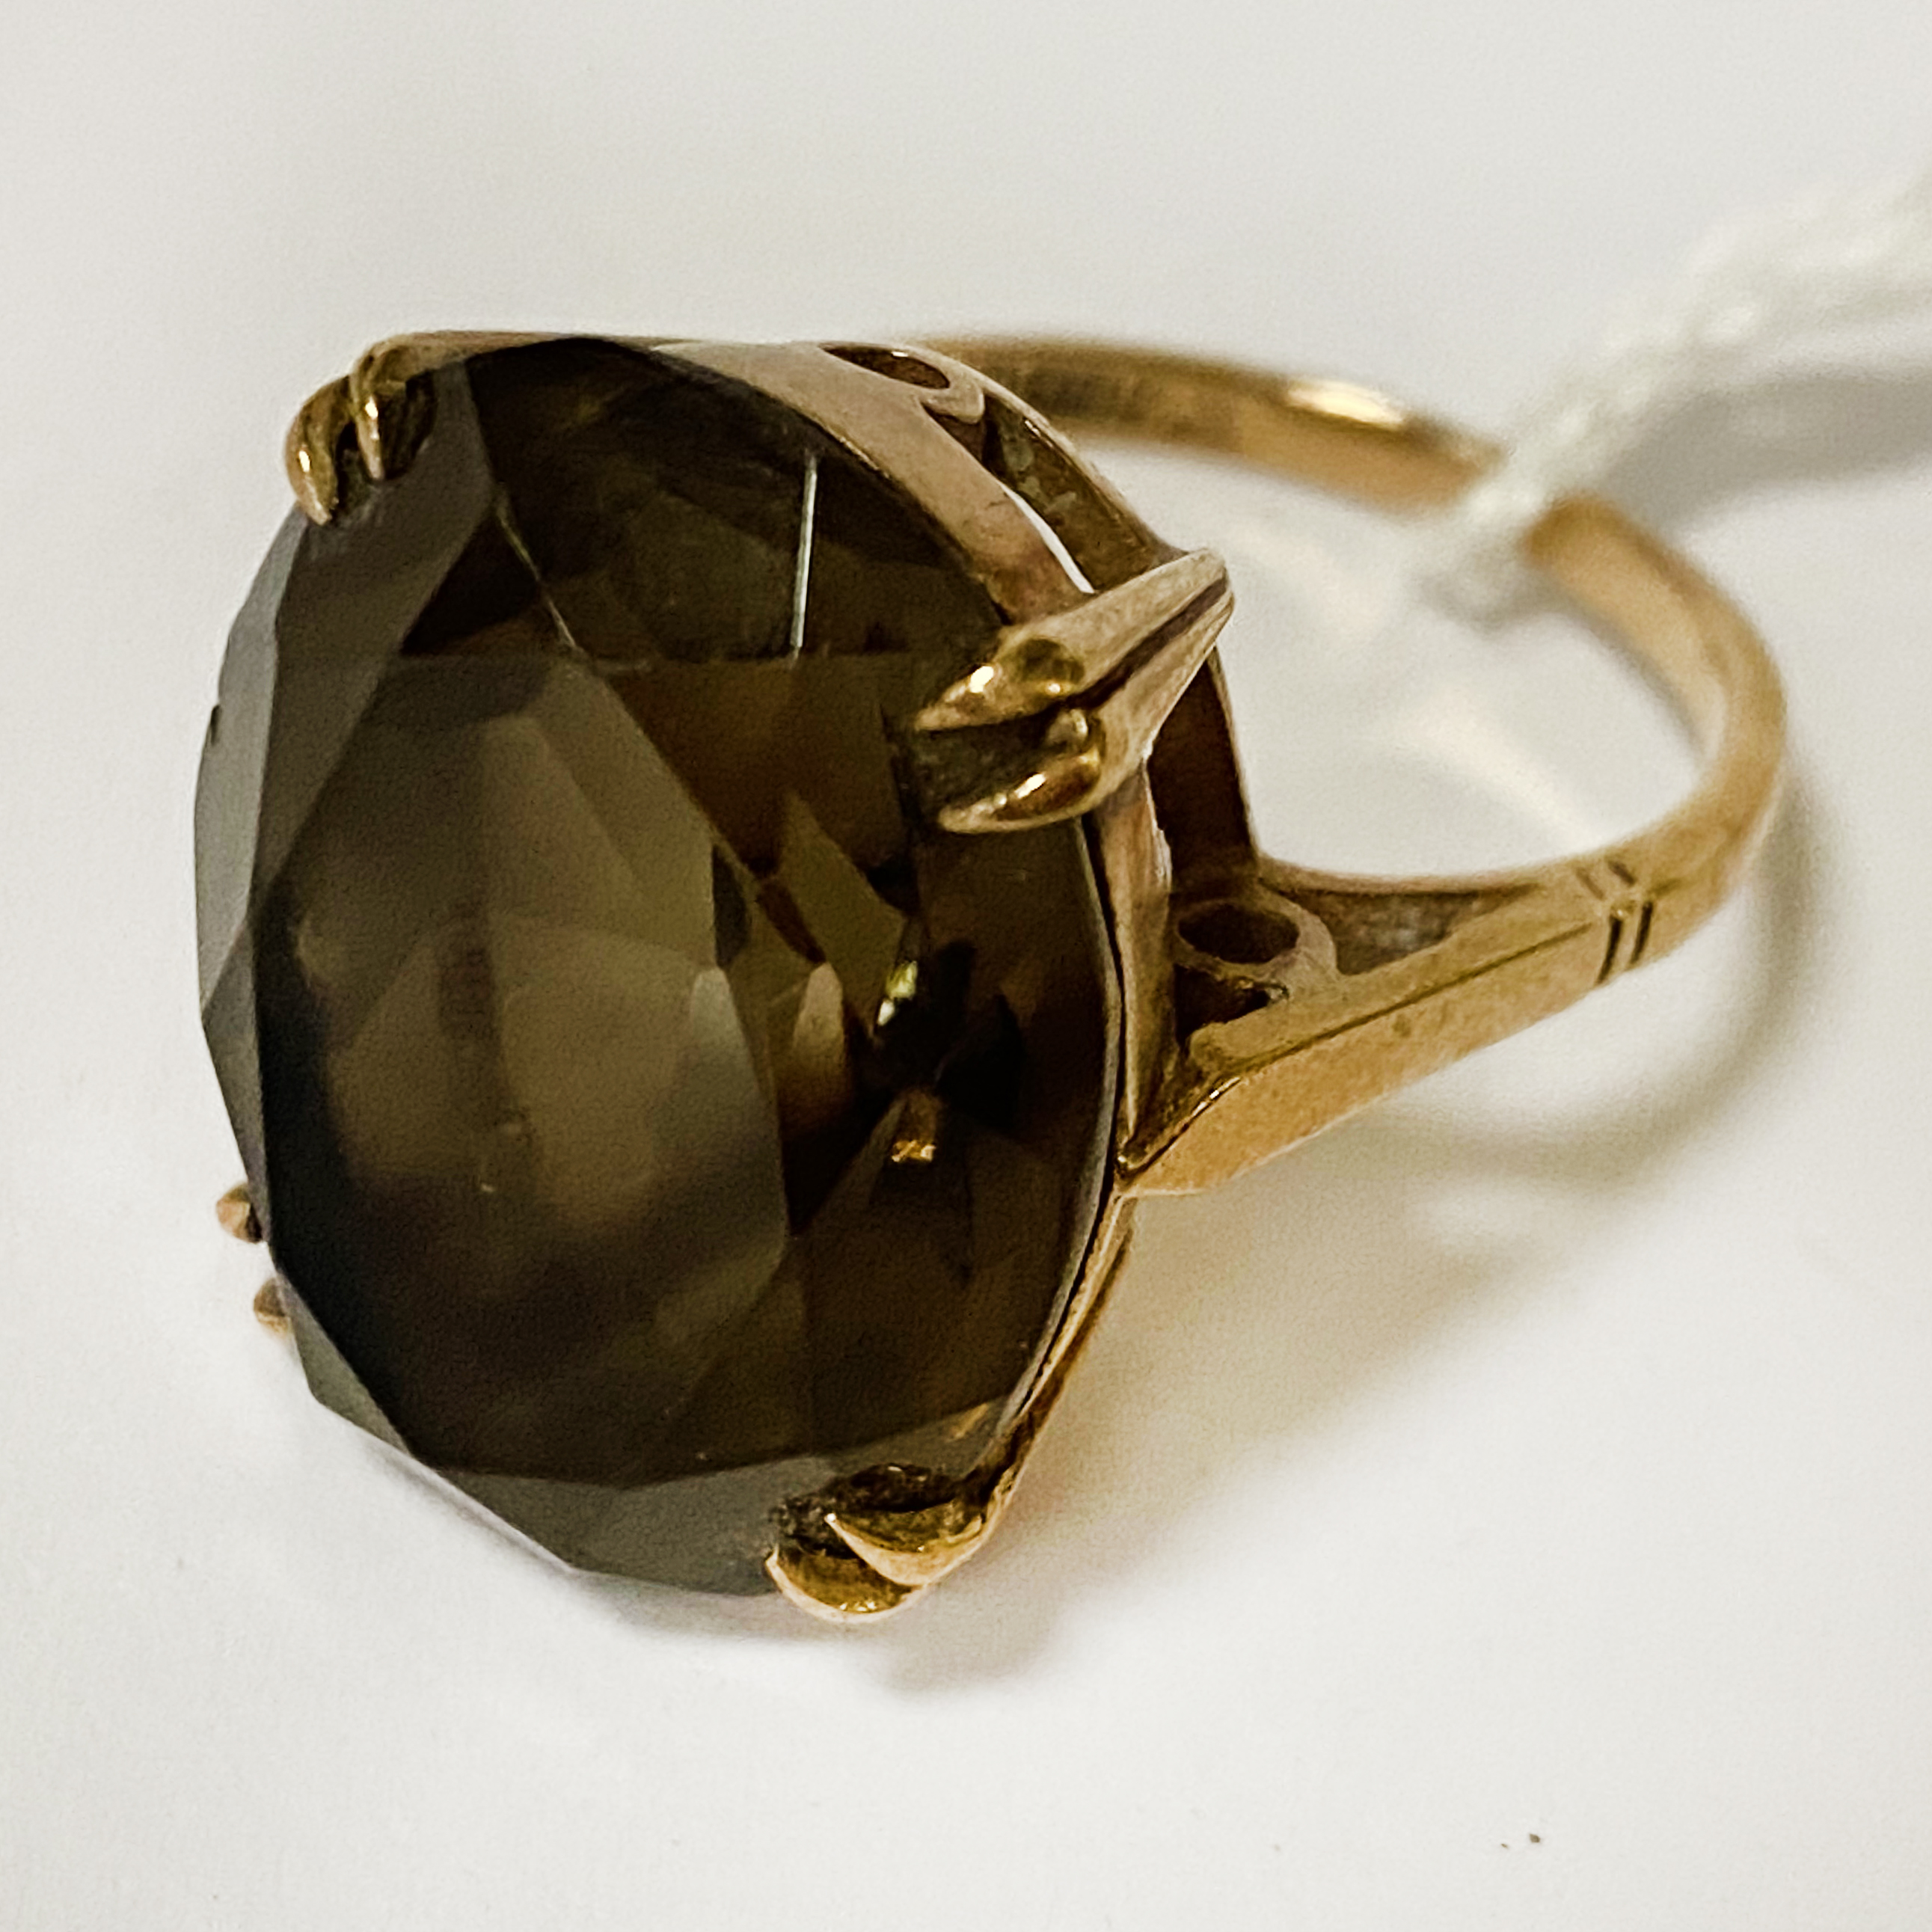 9CT GOLD SMOKY QUARTZ RING SIZE M 6.8 GRAMS APPROX